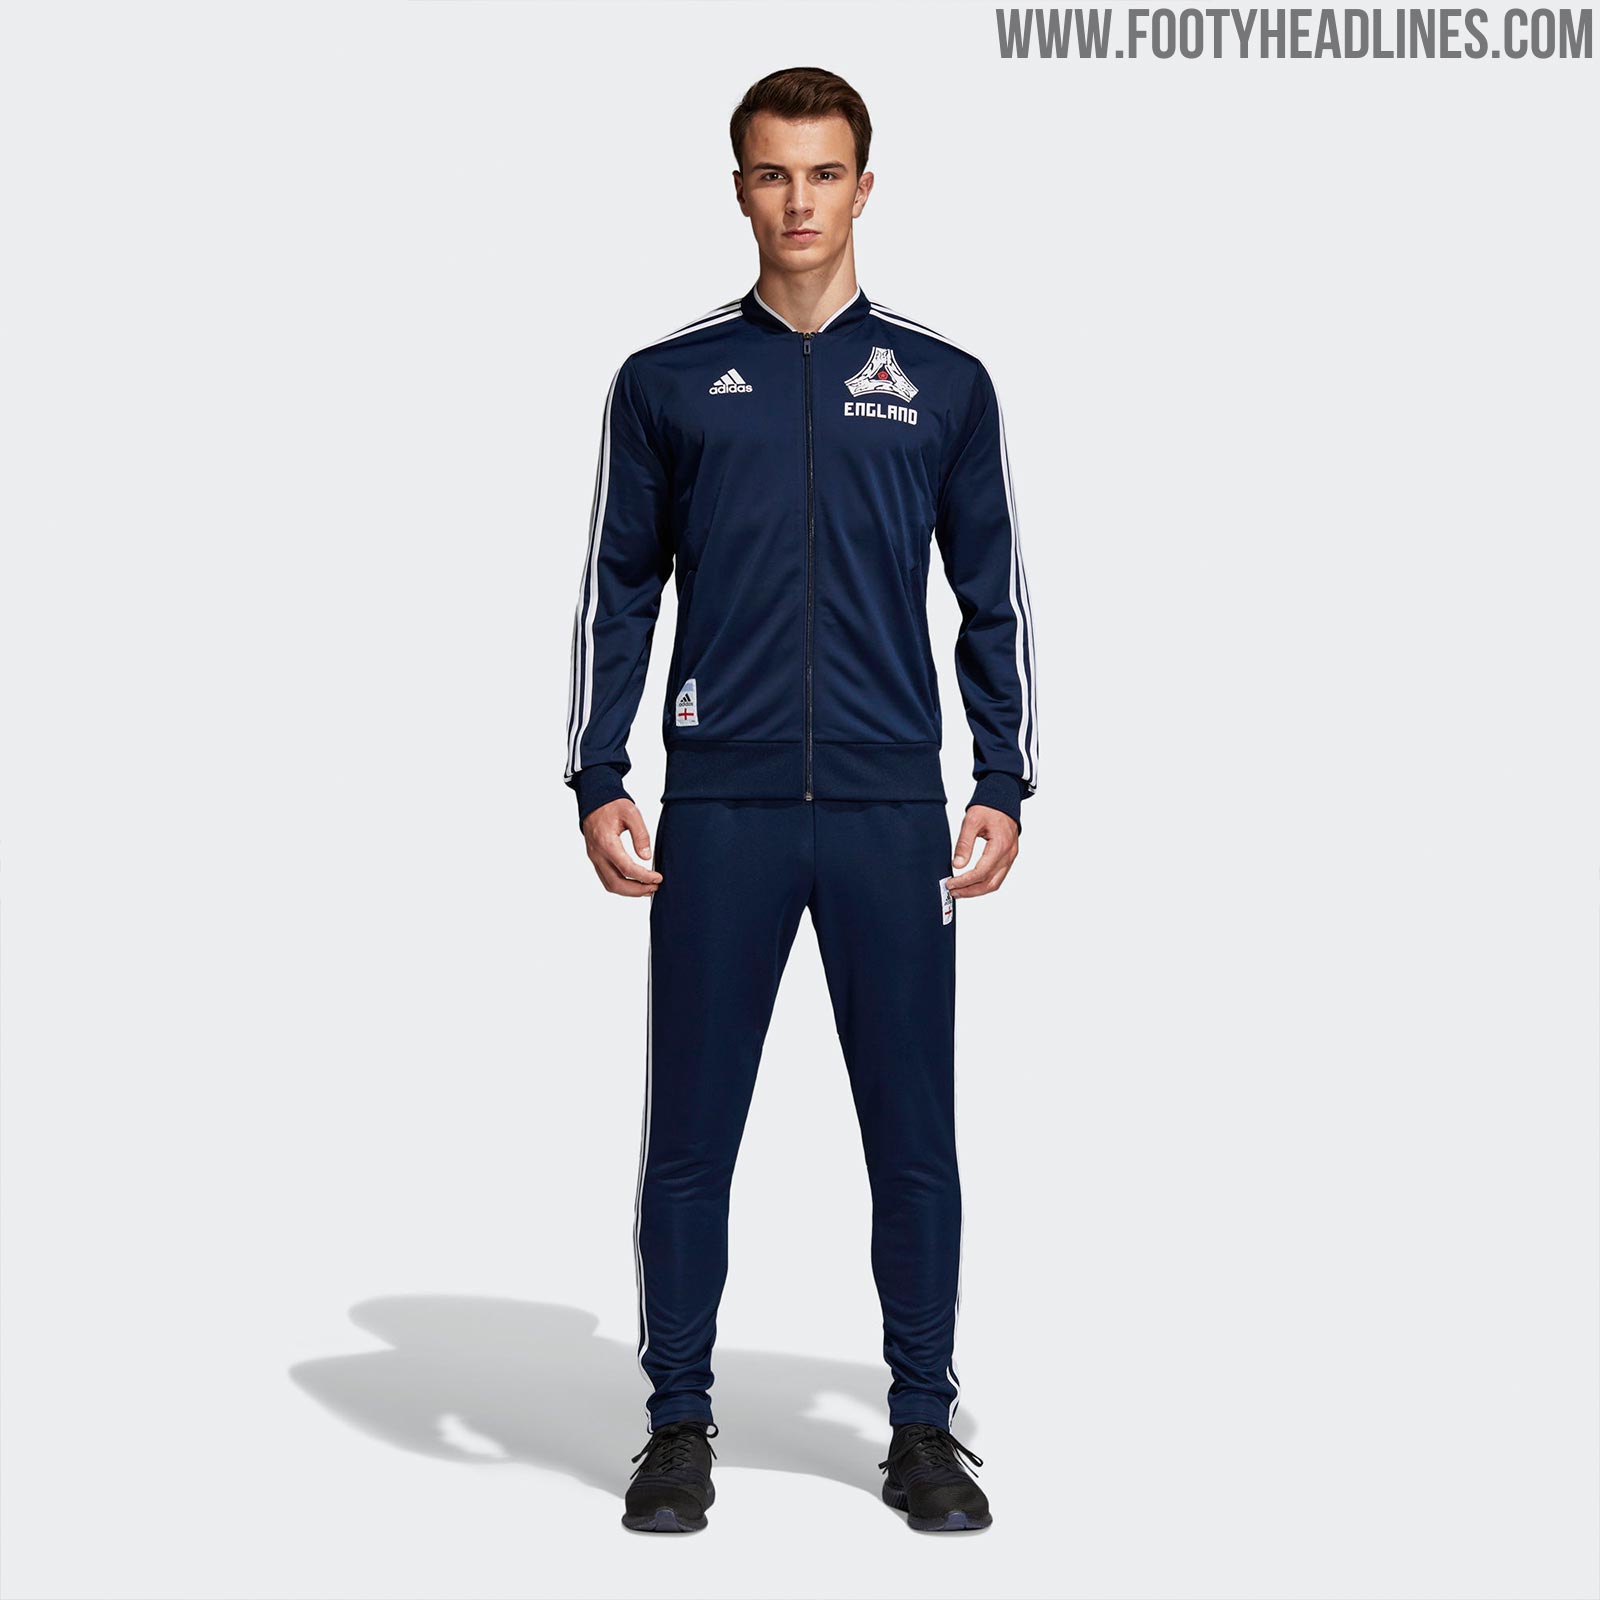 Adidas England 2018 World Cup Shirt and Tracksuit Collection Leaked ...